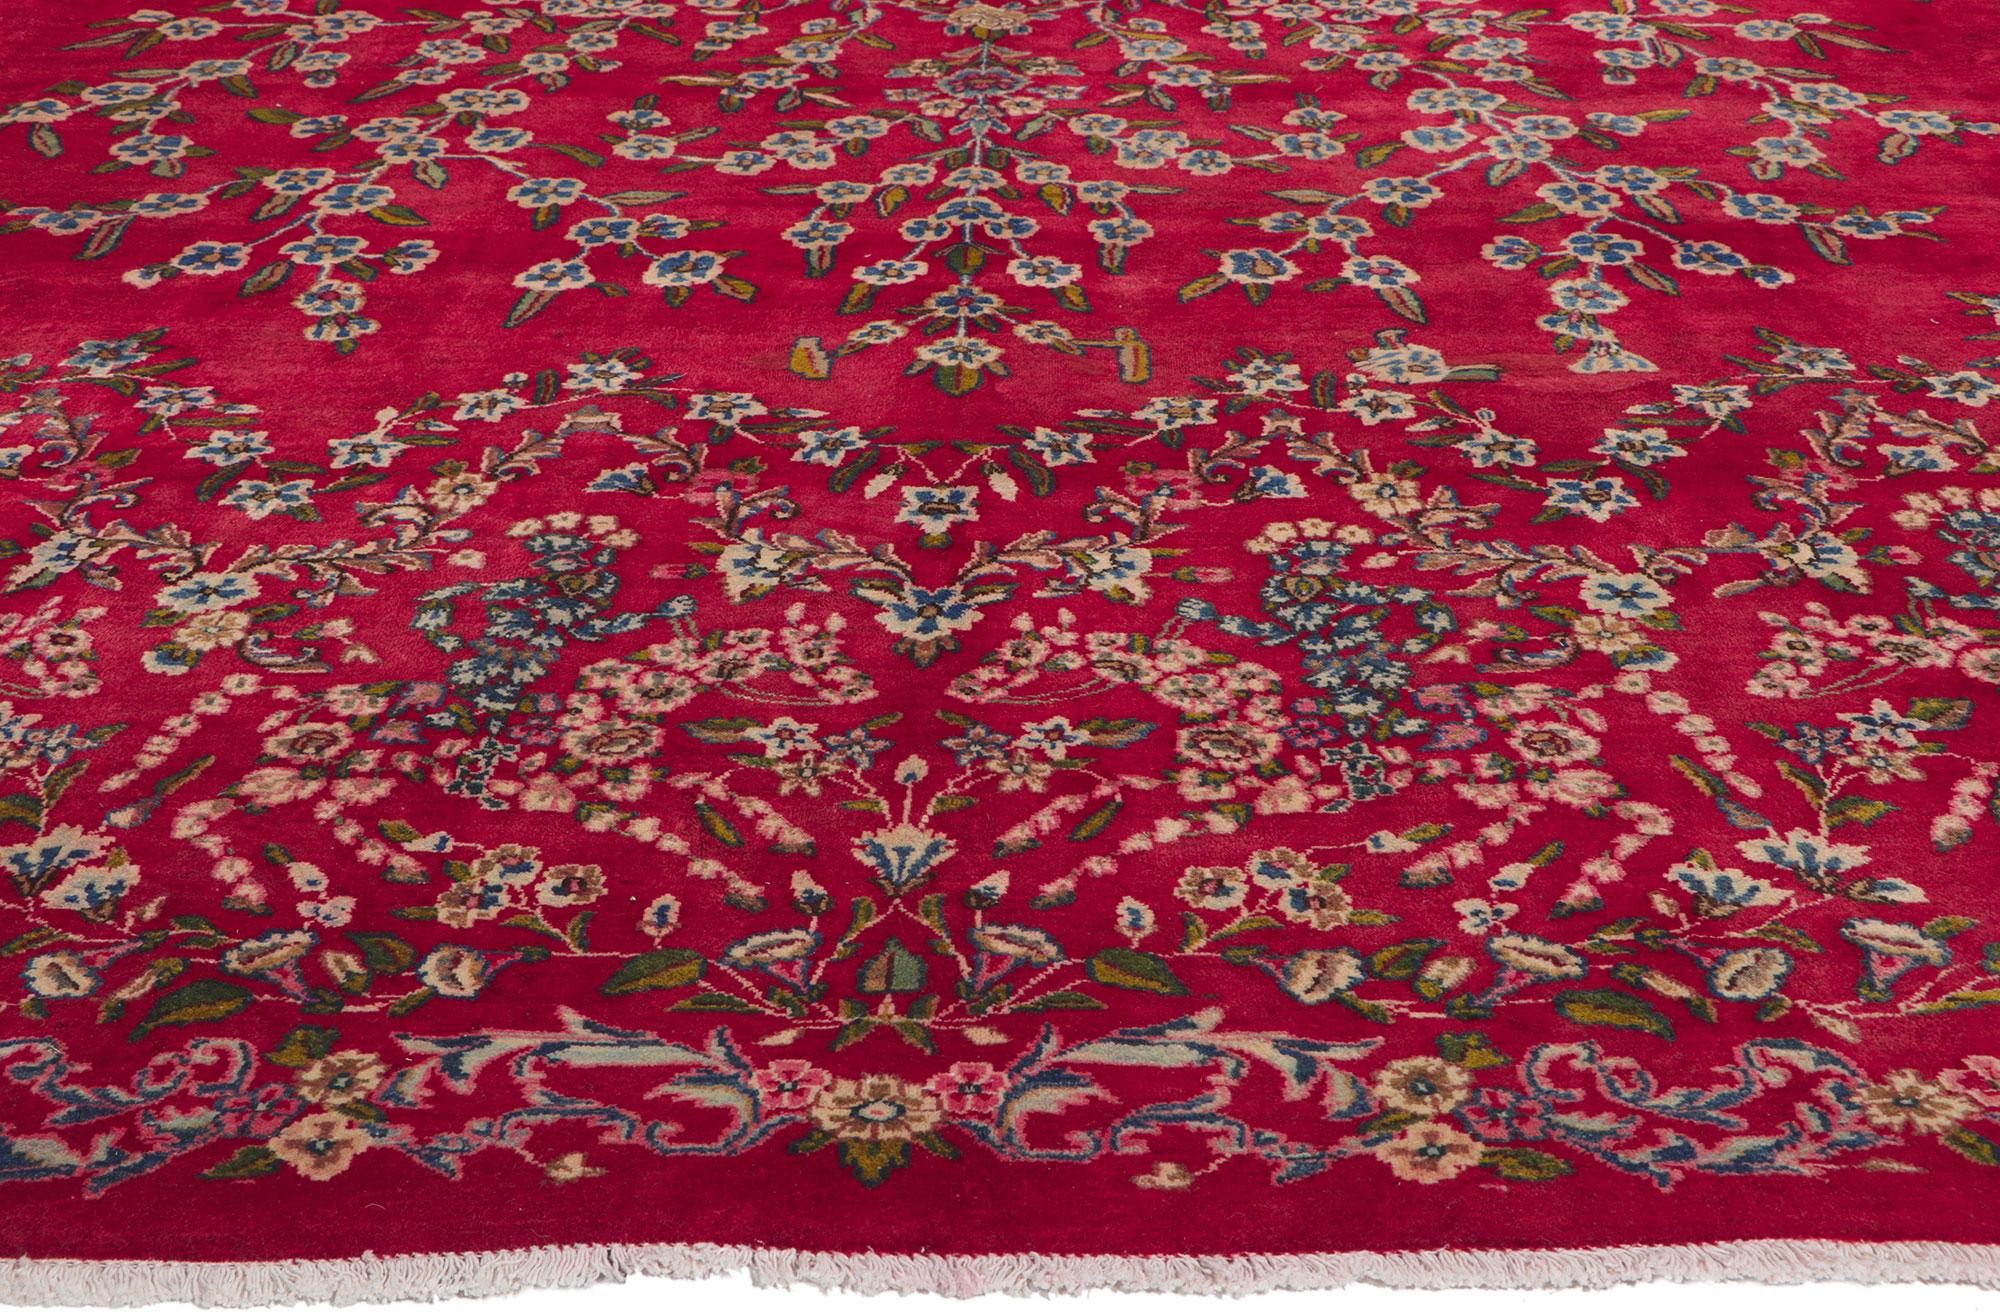 Hand-Knotted Antique Red Persian Floral Kerman Carpet, 13'00 ft x 16'00 ft